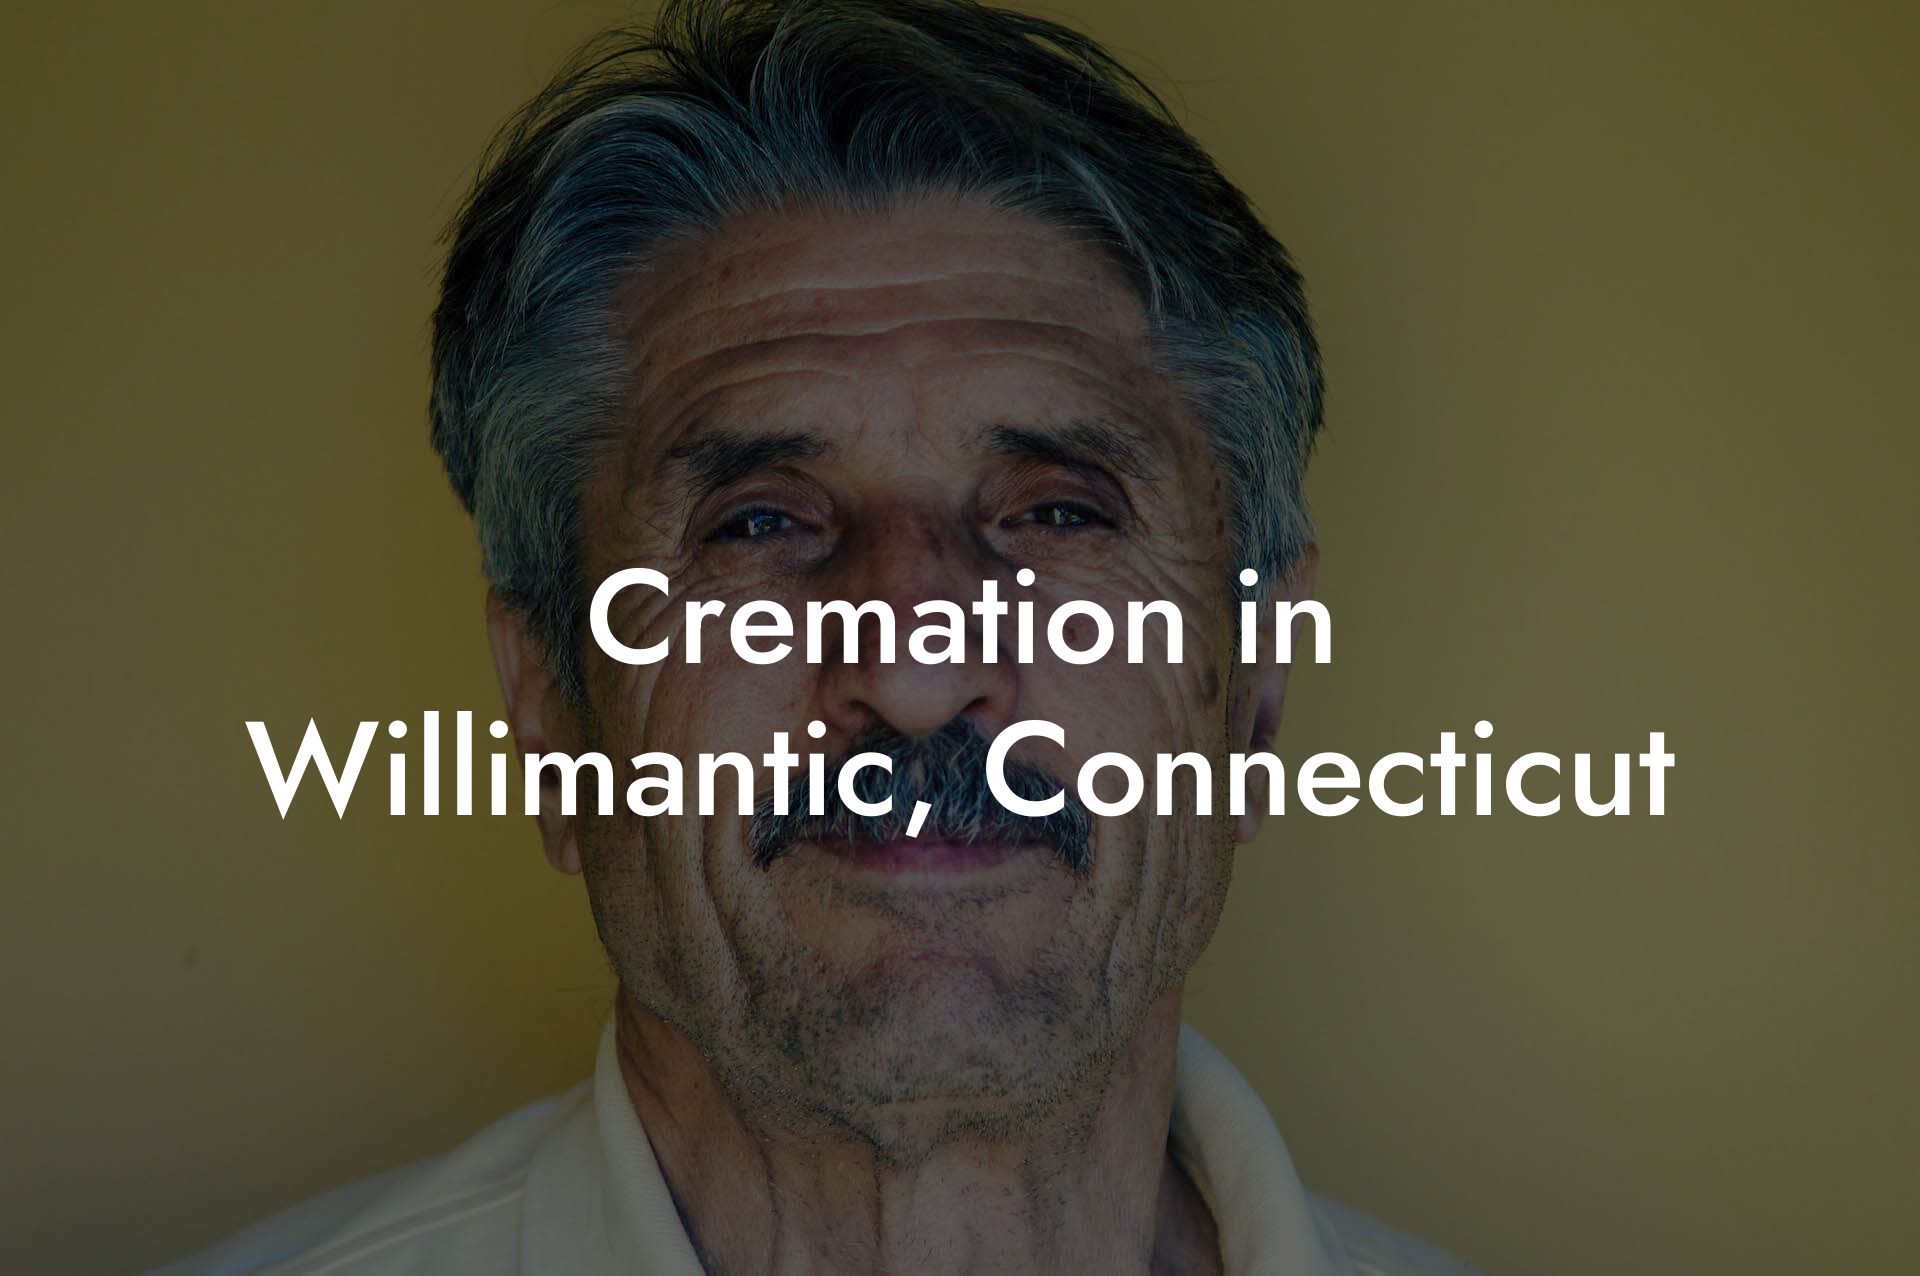 Cremation in Willimantic, Connecticut